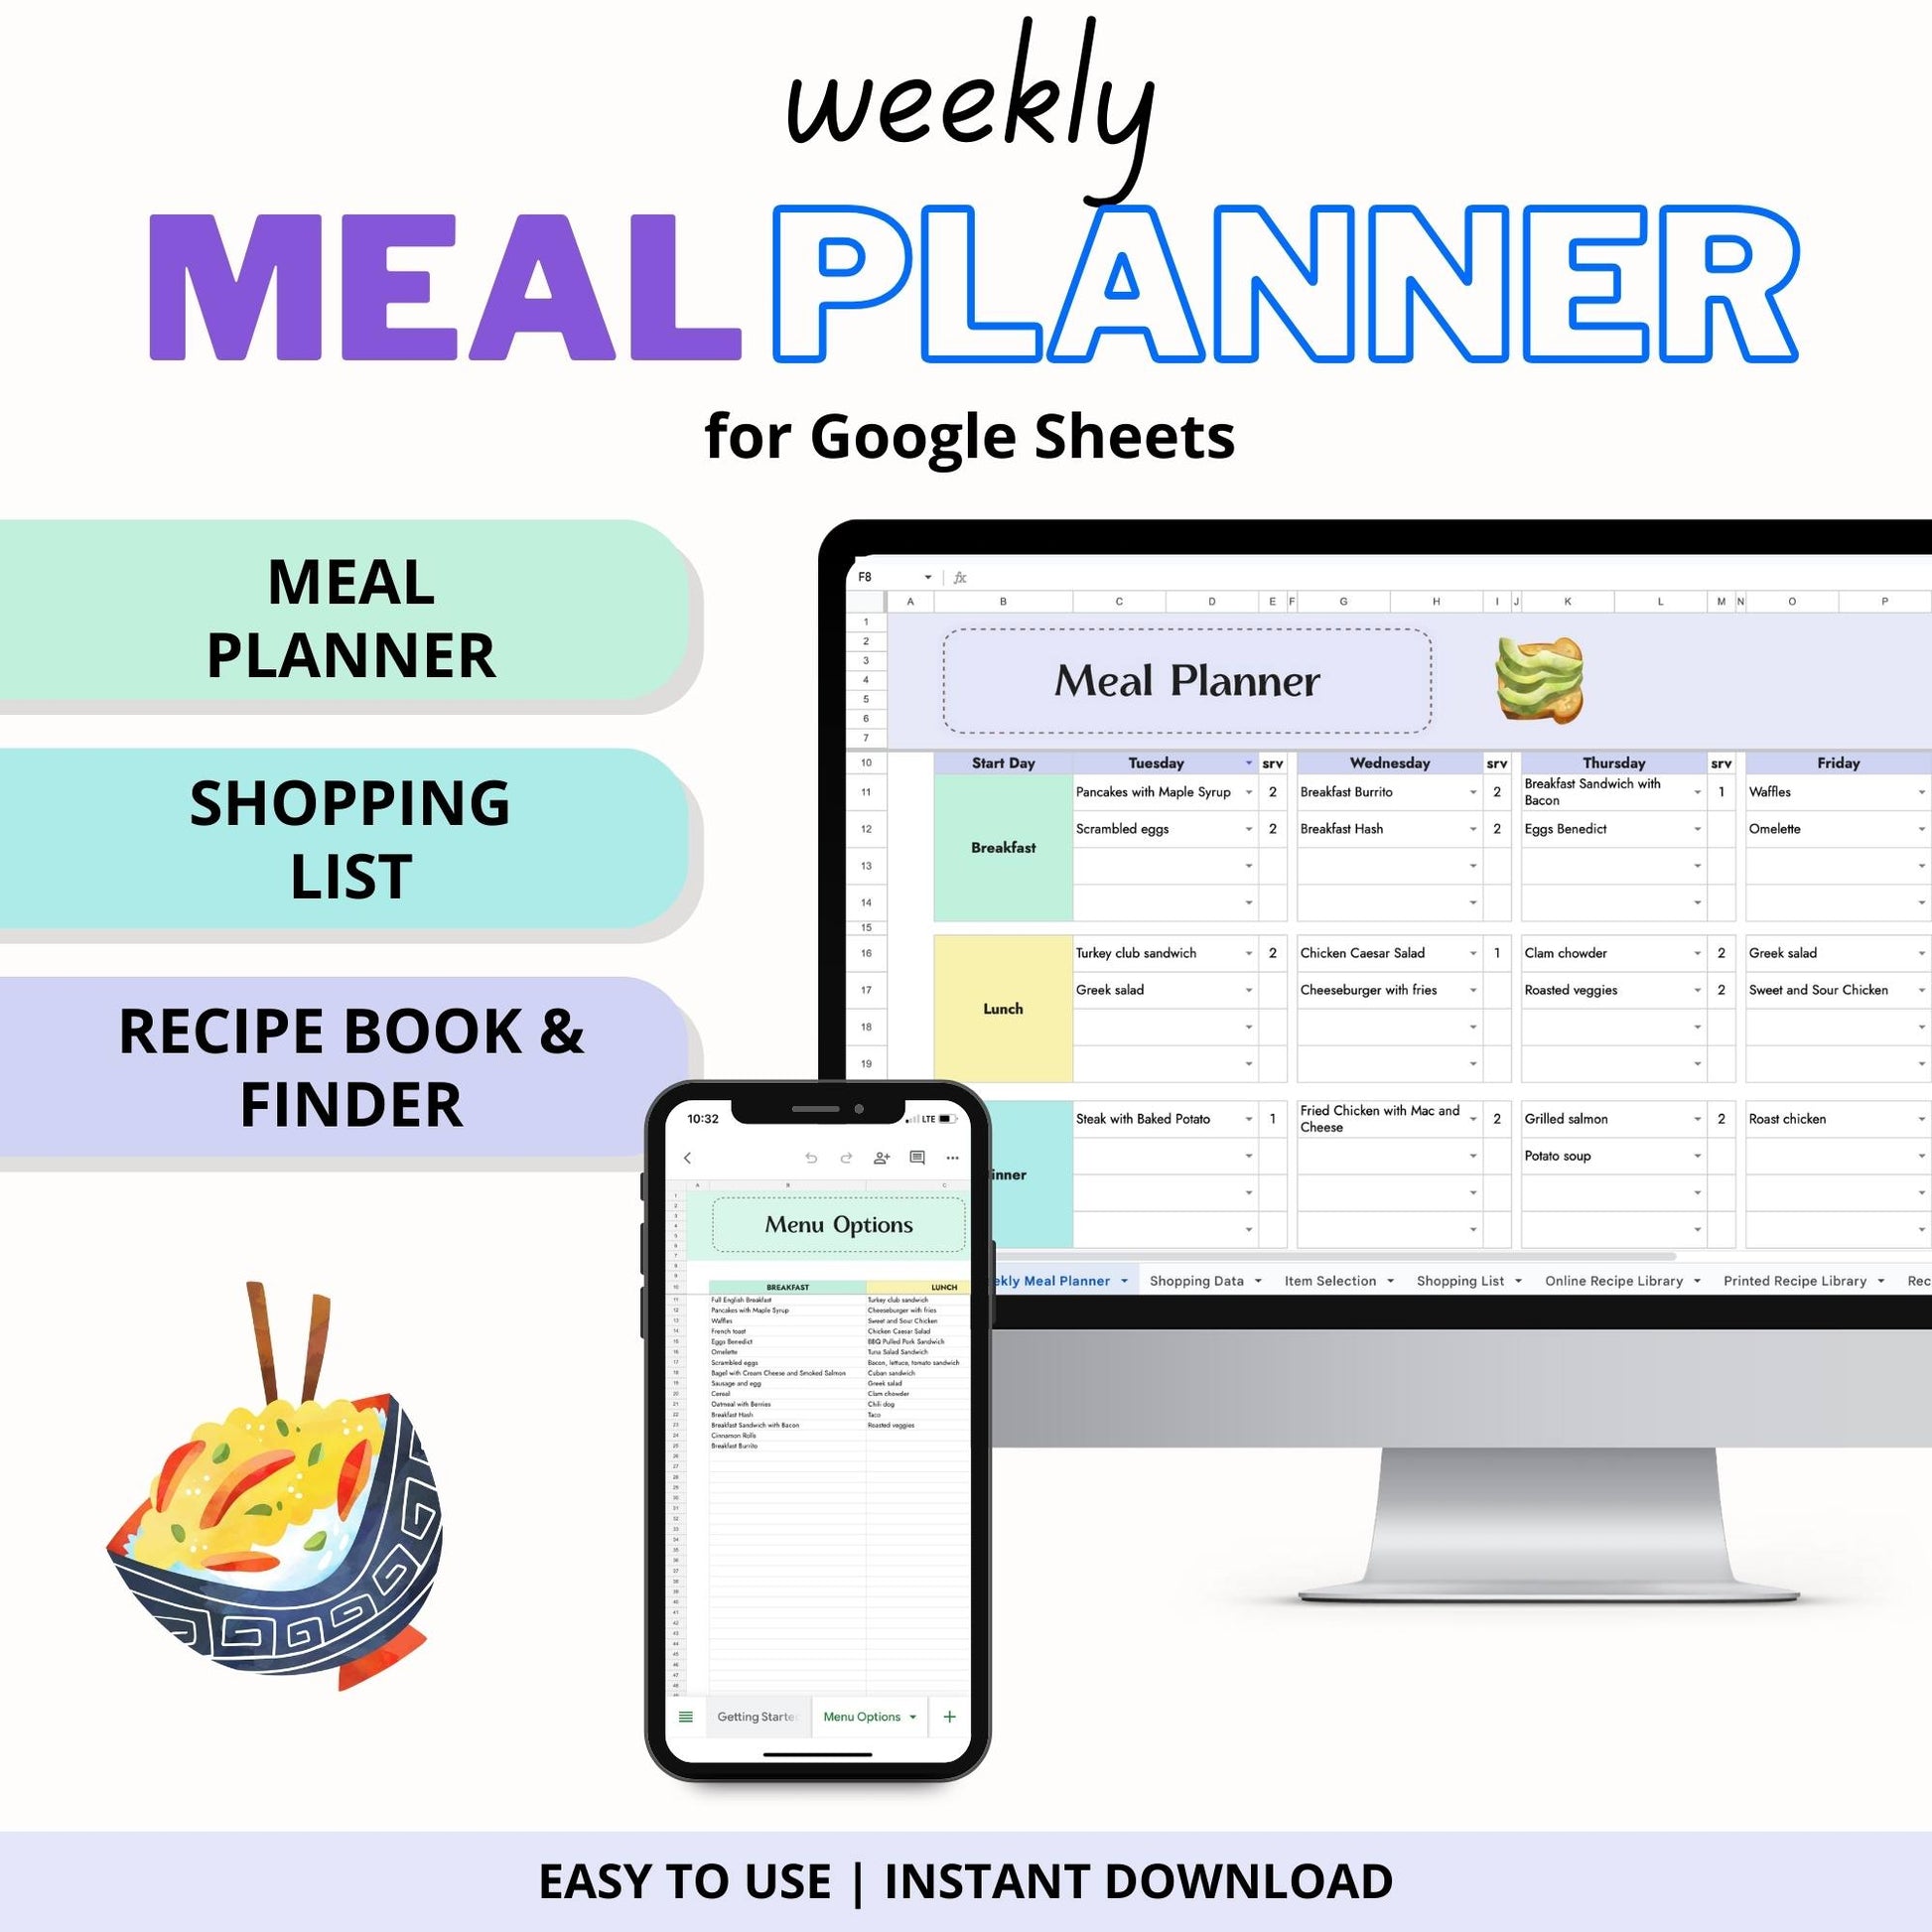 Text "weekly meal planner for google sheets" with a mockup of a spreadsheet on a computer and on a phone